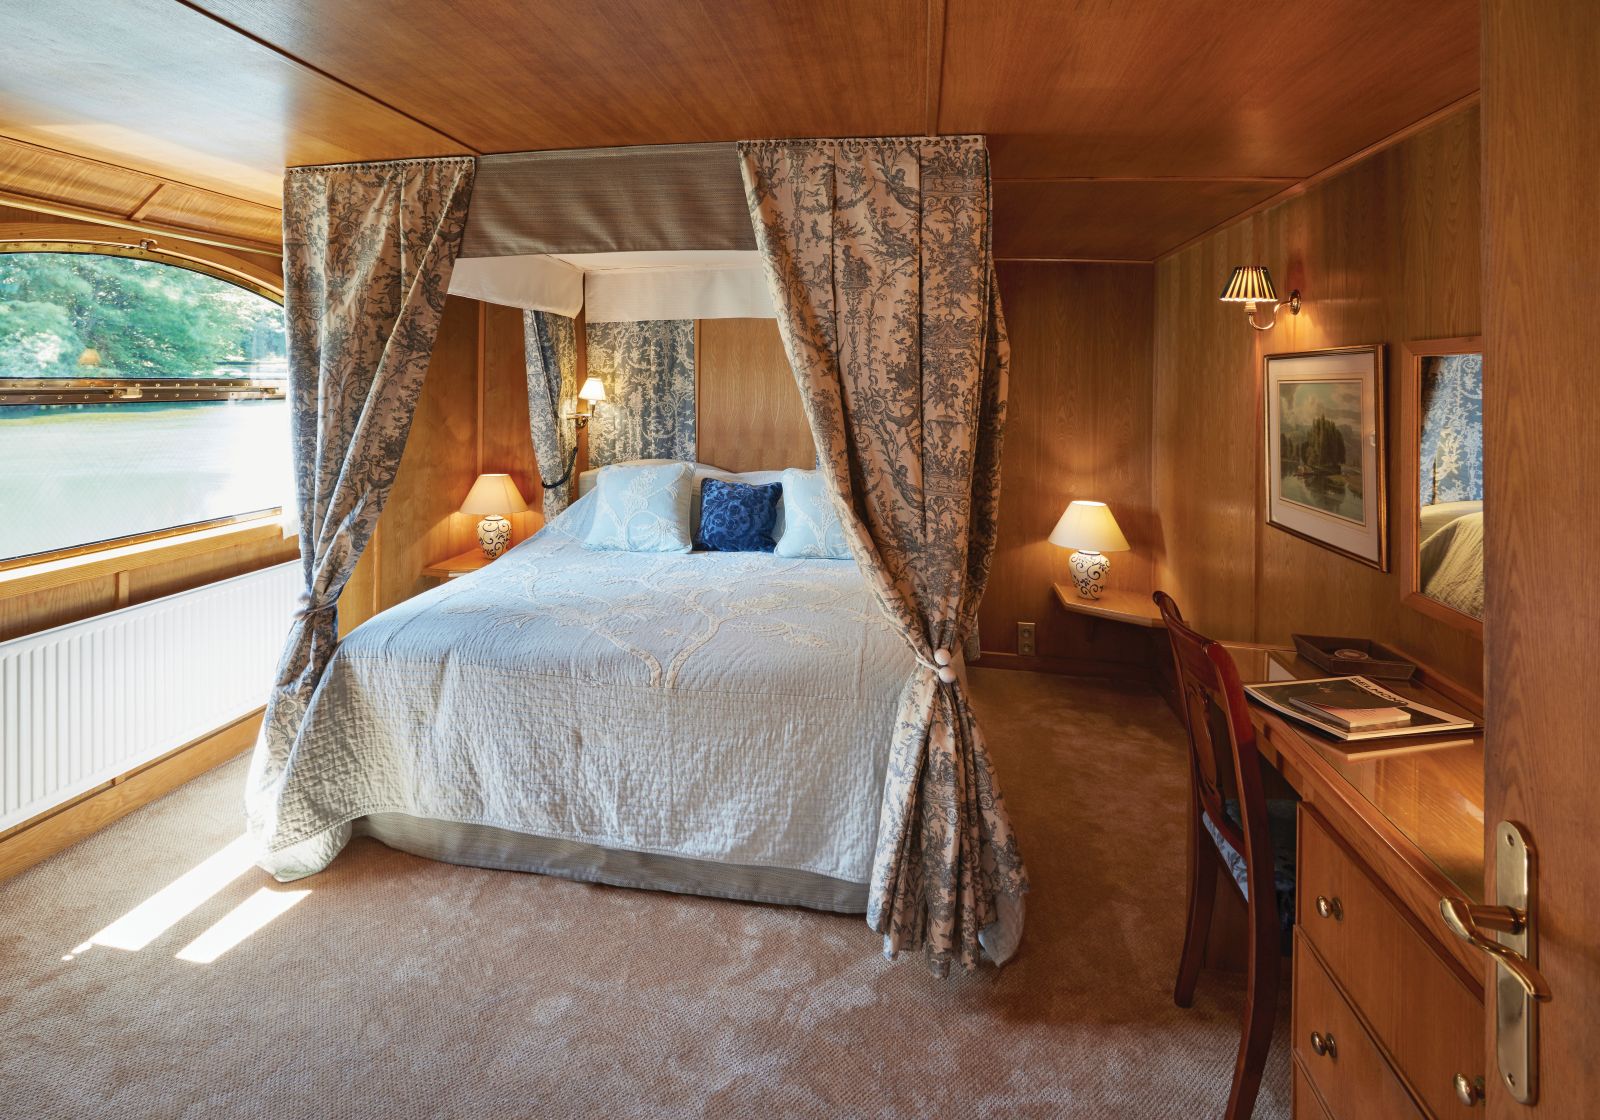 Cabin and river view on board the Belmond Fleur de Lys river barge in France